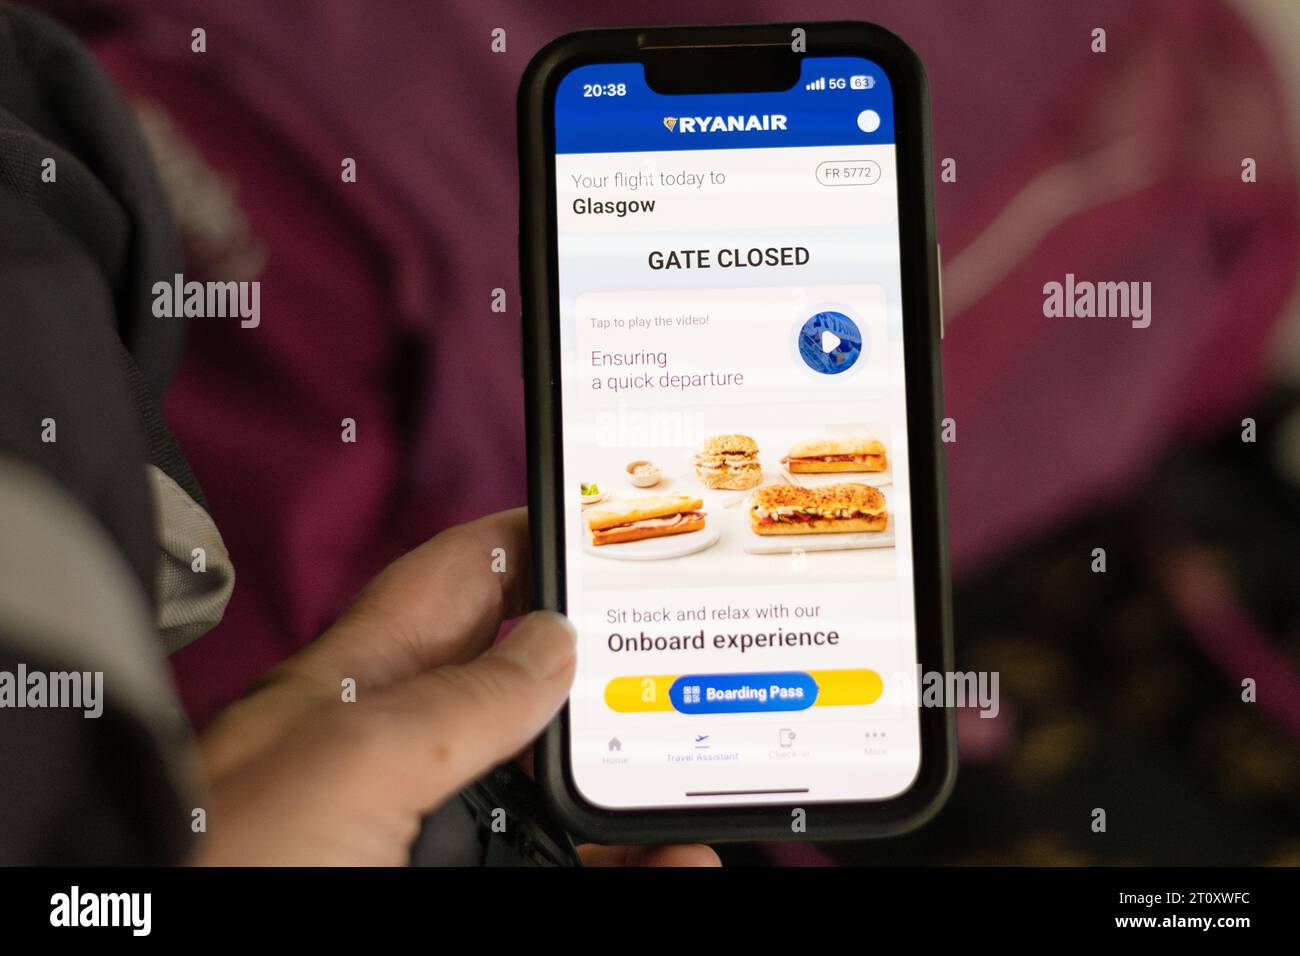 Missed flight - passenger looking at gate closed message on Ryanair phone app with bags on airport trolley in background Stock Photo